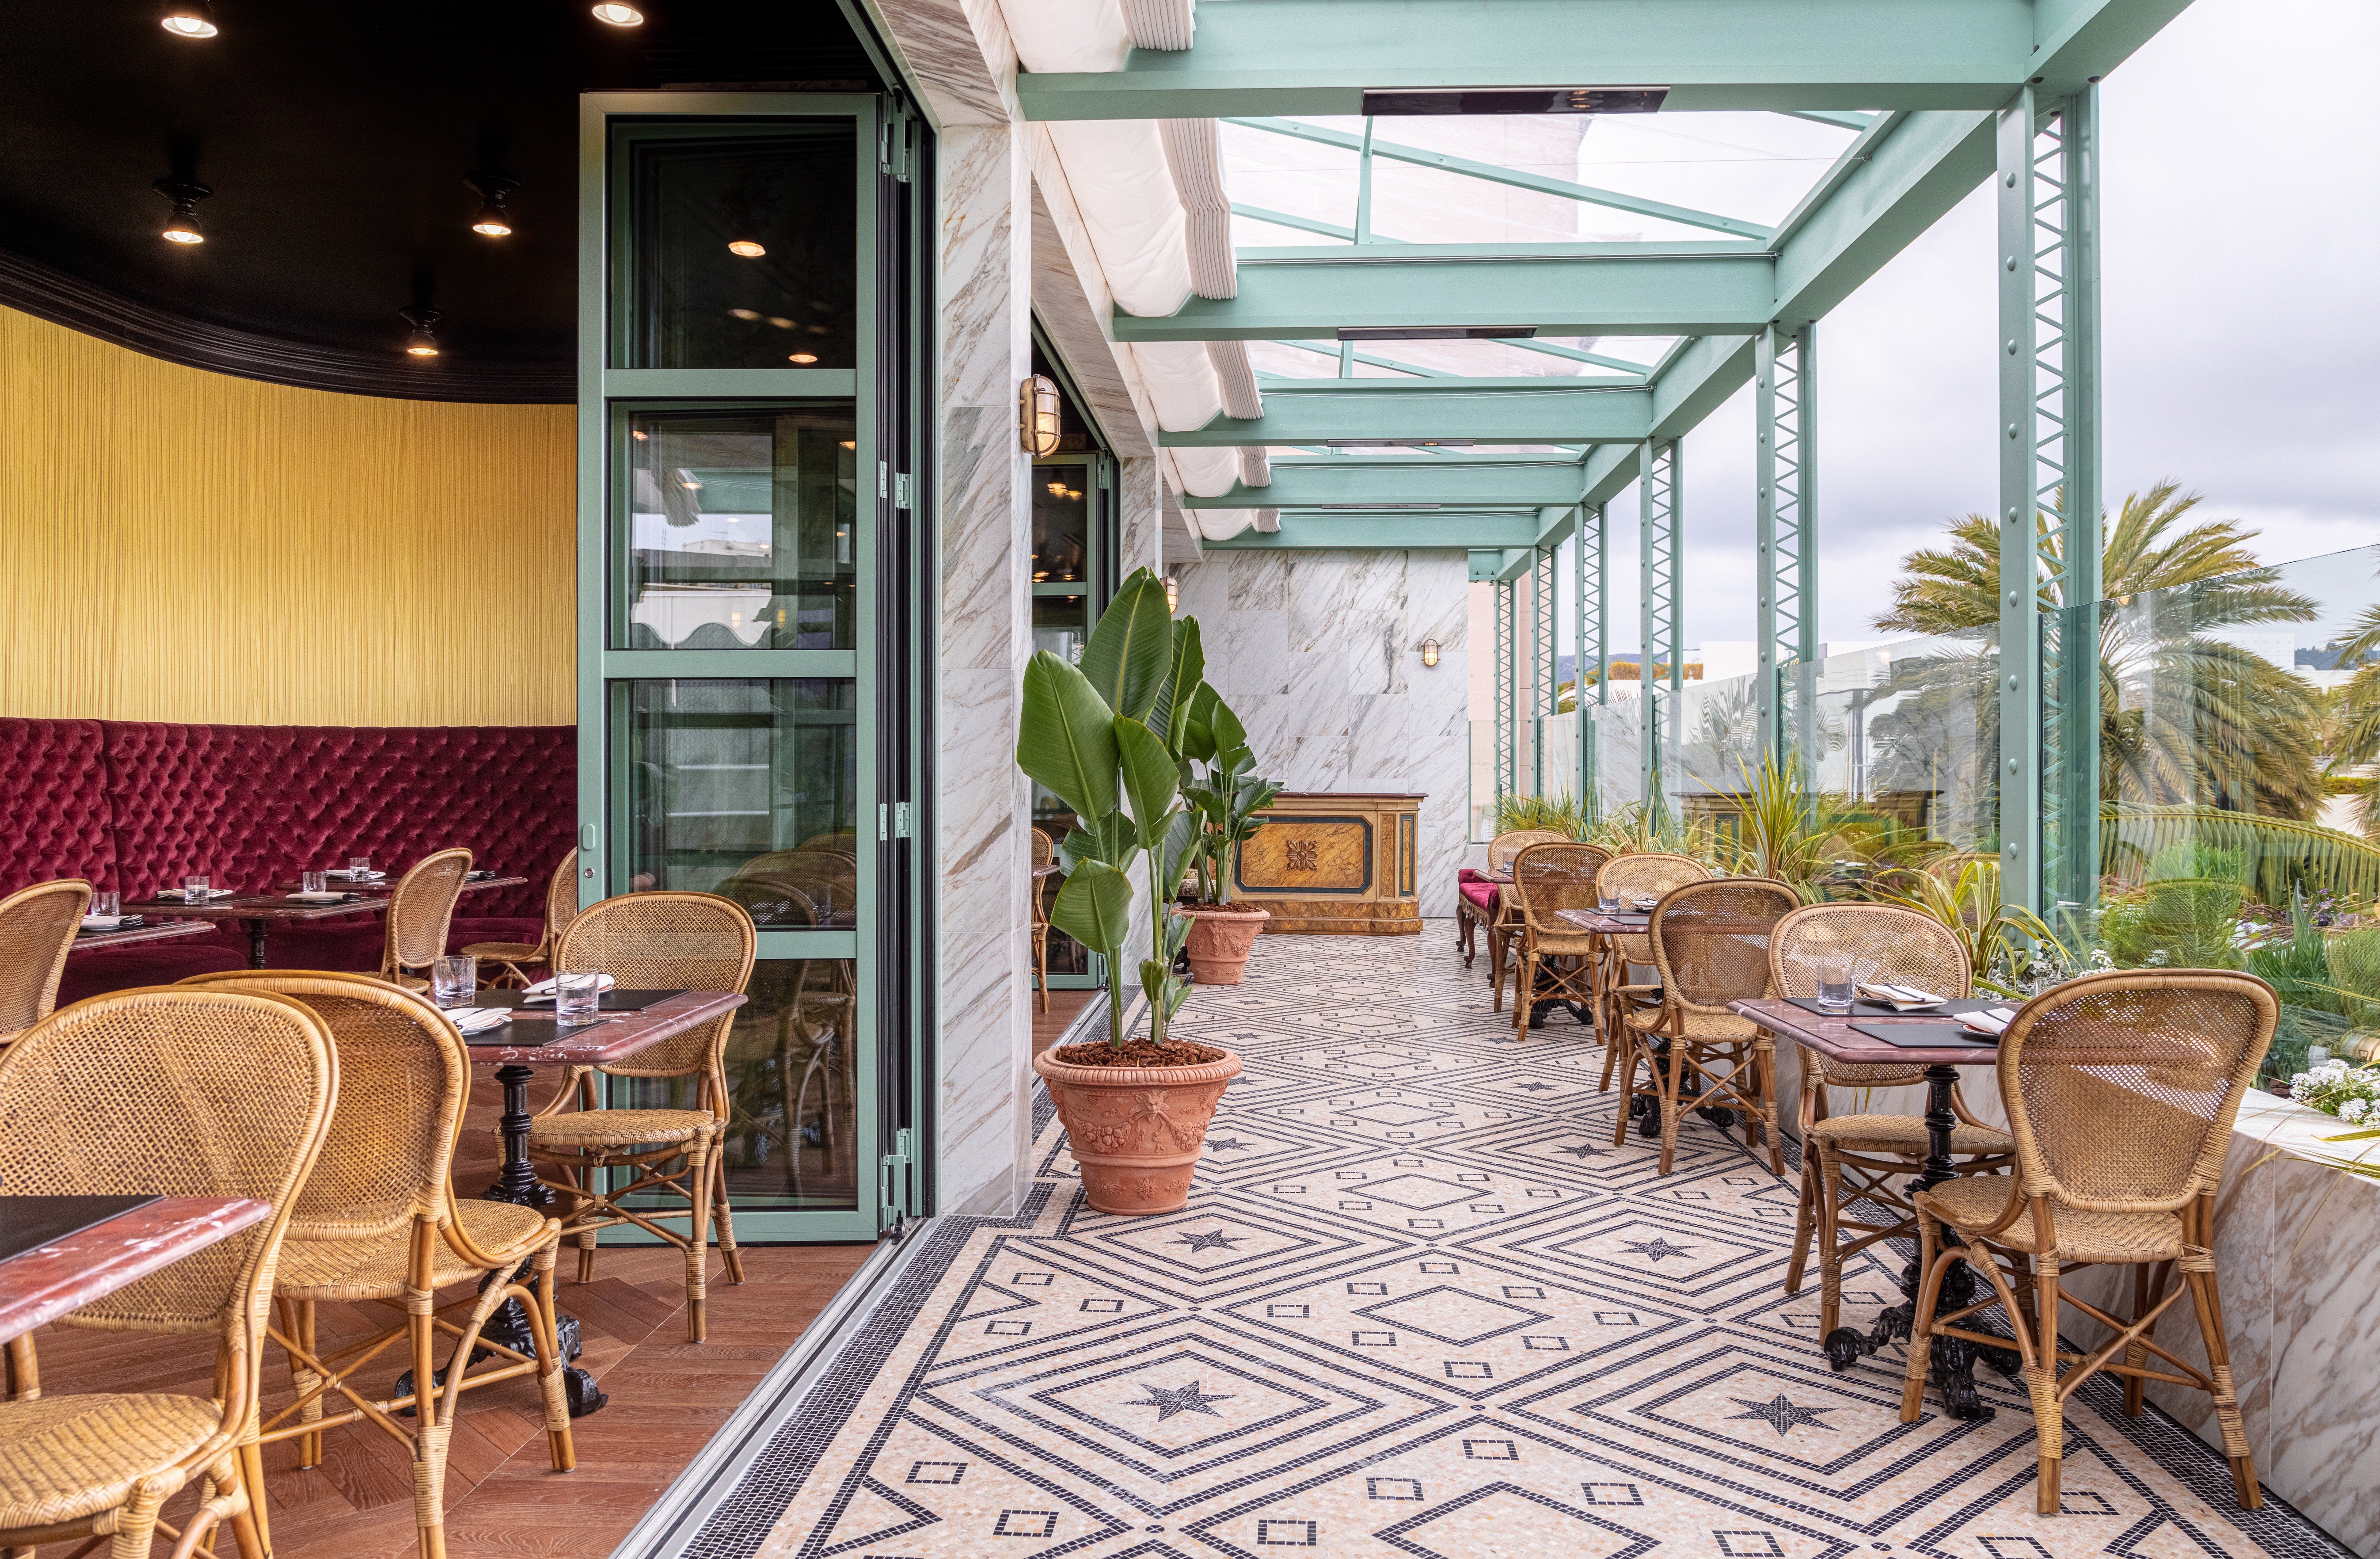 The new Gucci Osteria da Massimo Bottura Beverly Hills is located on the roof of the brand’s Rodeo Drive boutique in Los Angeles. Photo: Pablo Enriquez